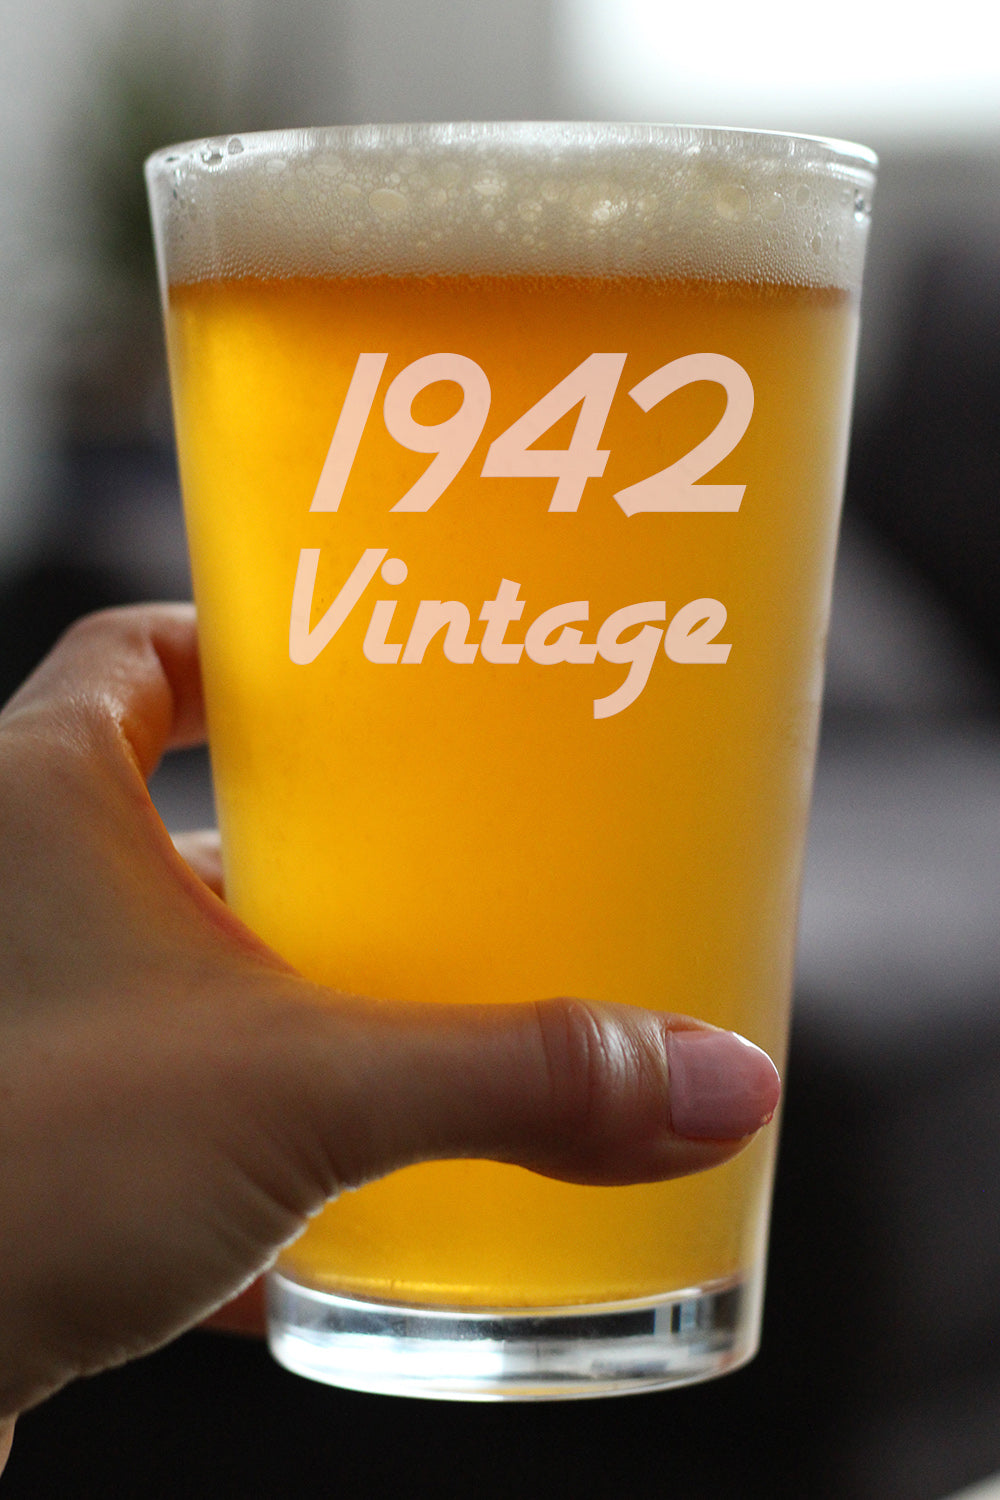 Vintage 1942 - Pint Glass for Beer - 82nd Birthday Gifts for Men or Women Turning 82 - Fun Bday Party Decor - 16 oz